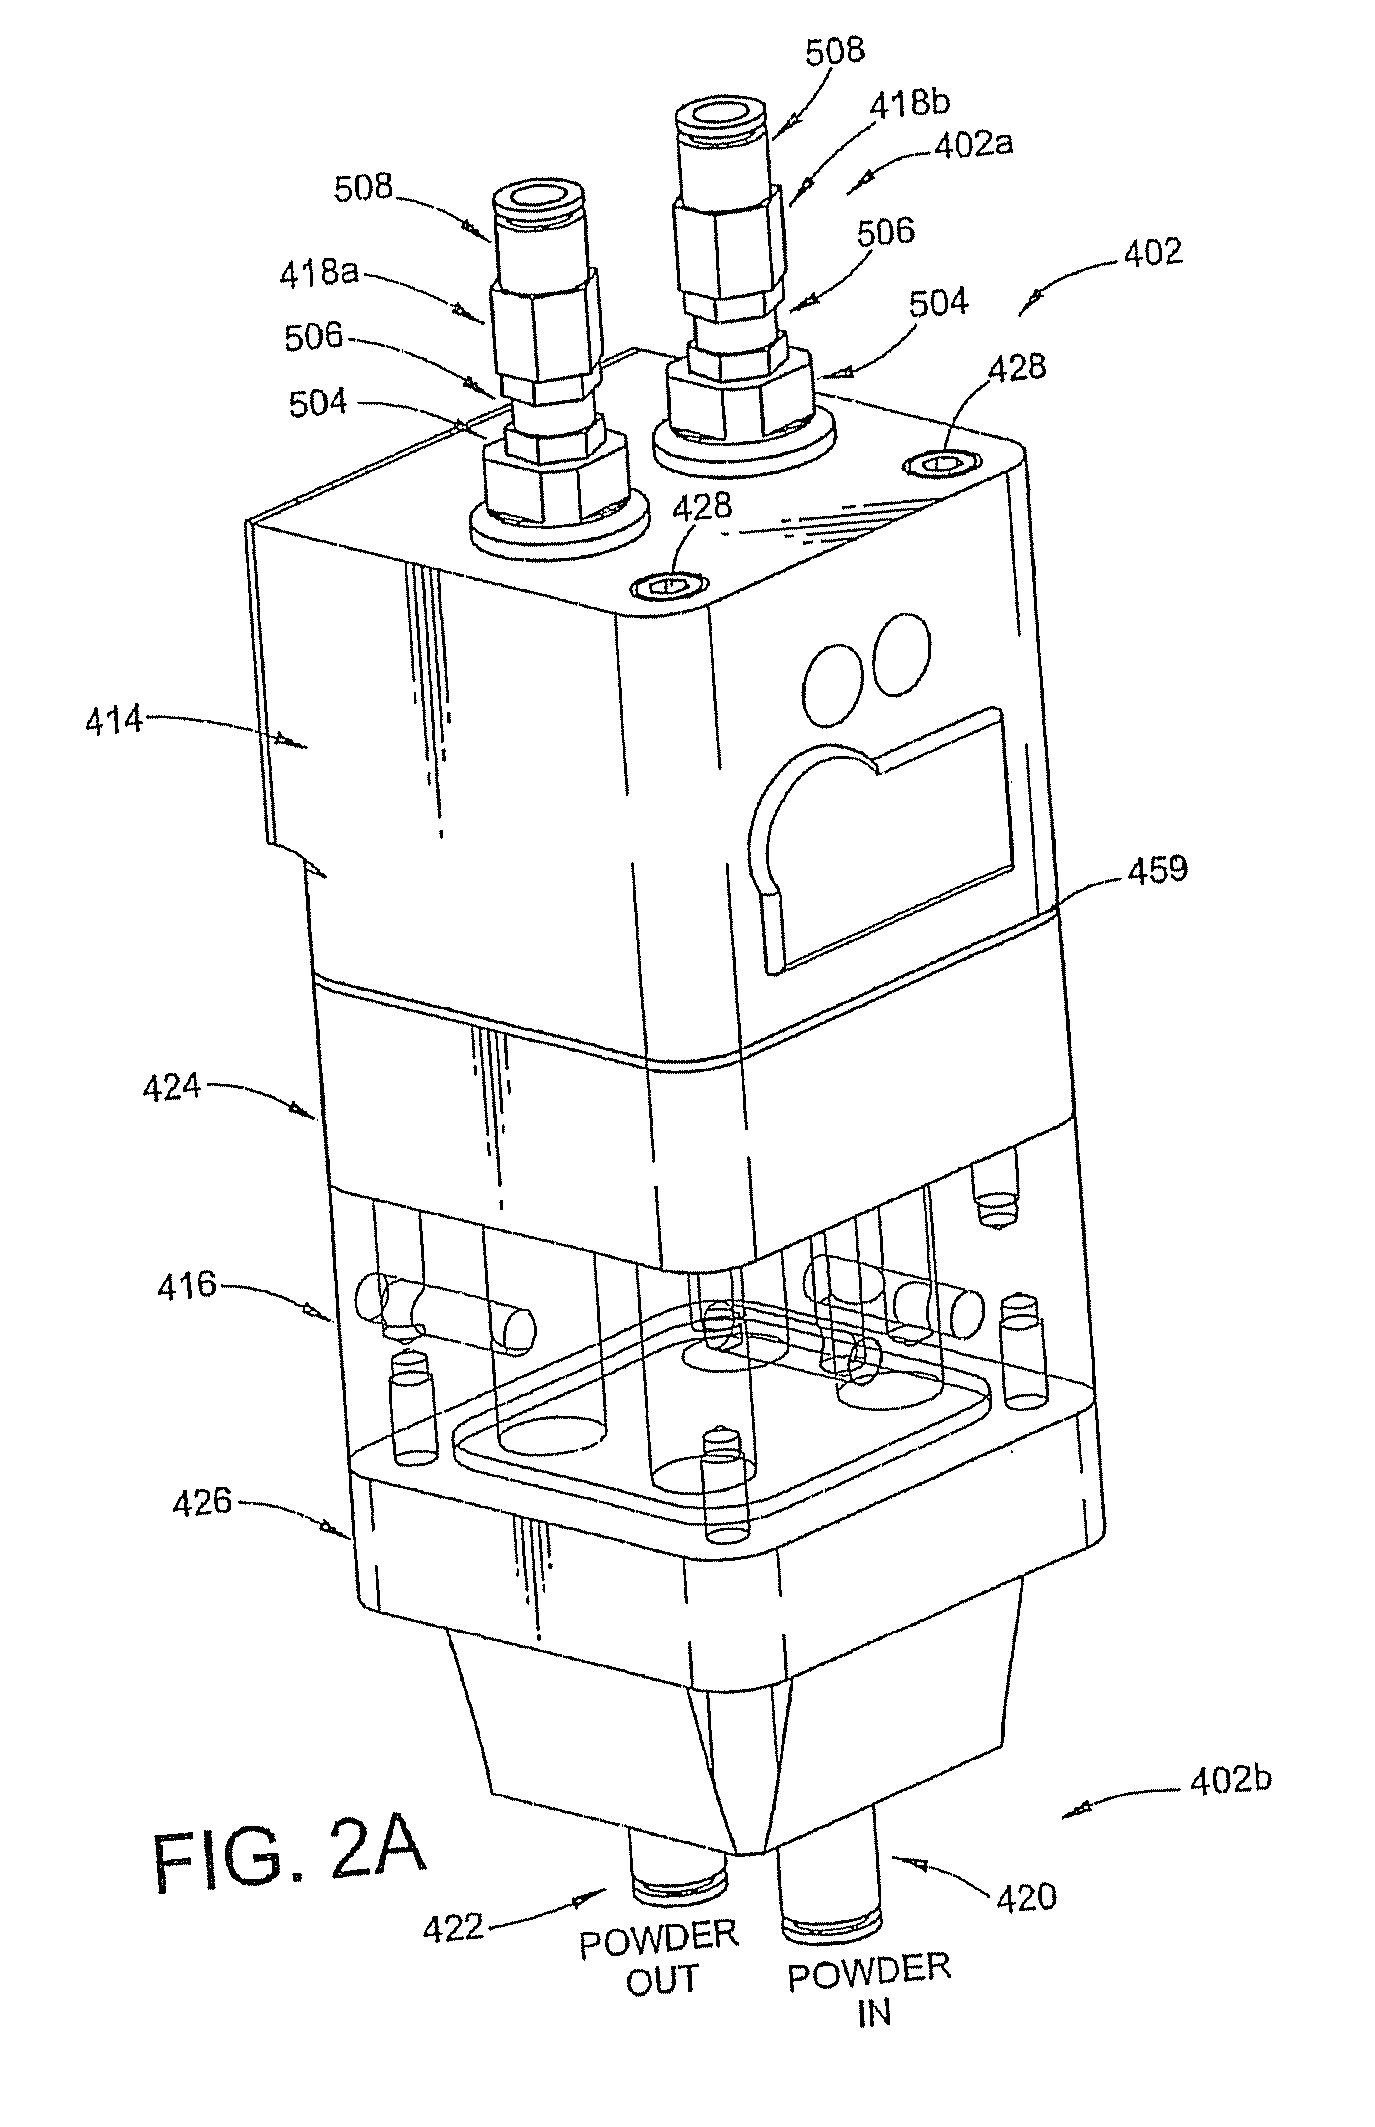 Pump with Suction and Pressure Control for Dry Particulate Material